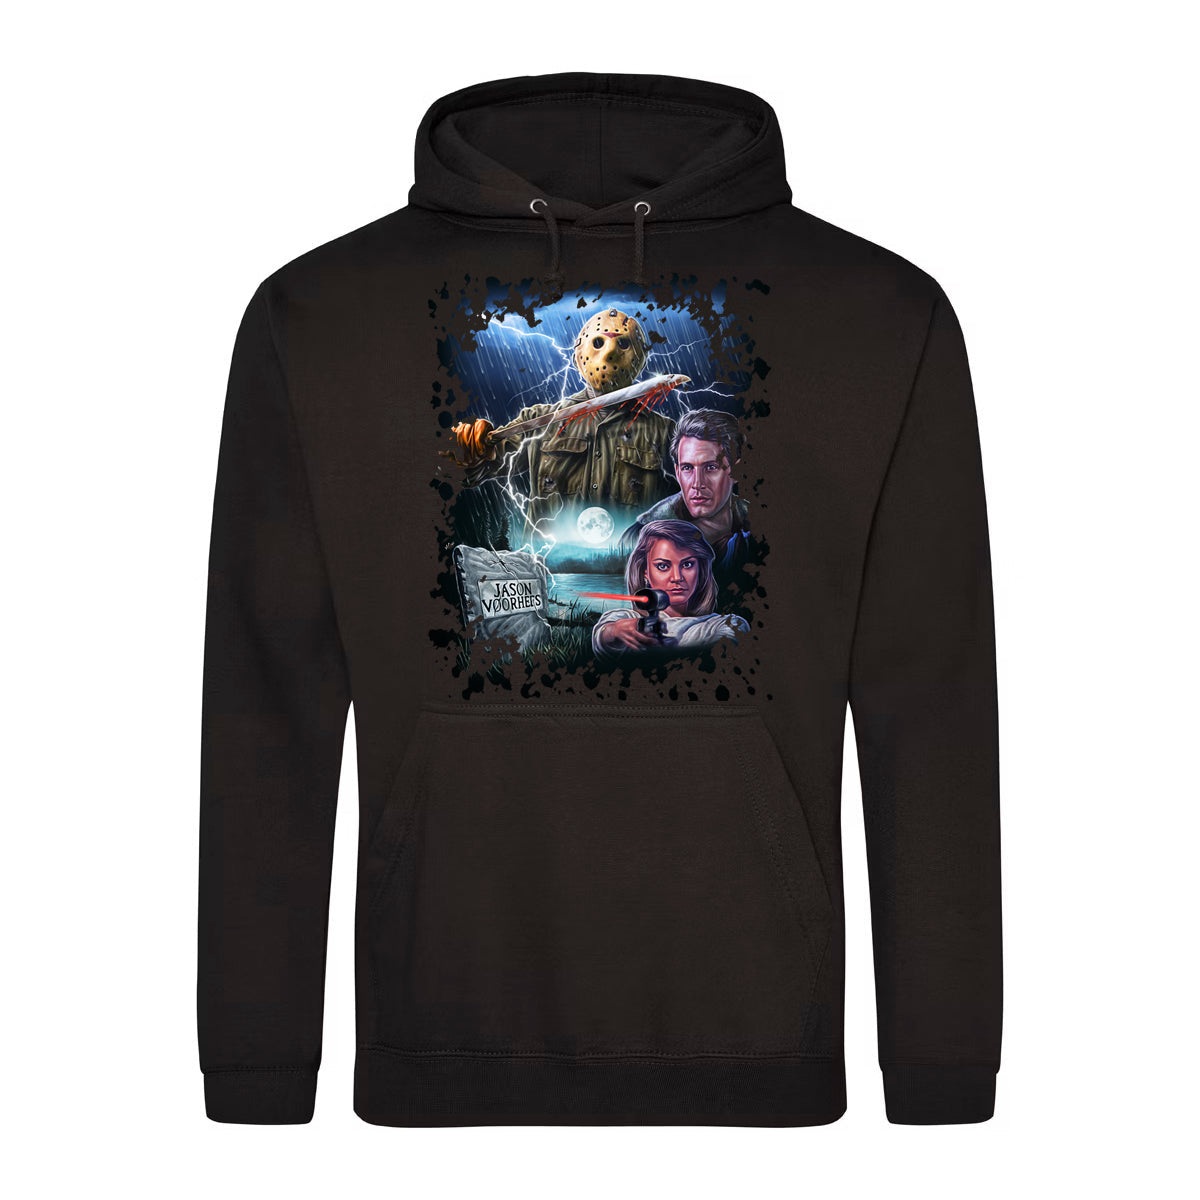 SPECIAL "He Lives" Hoodie